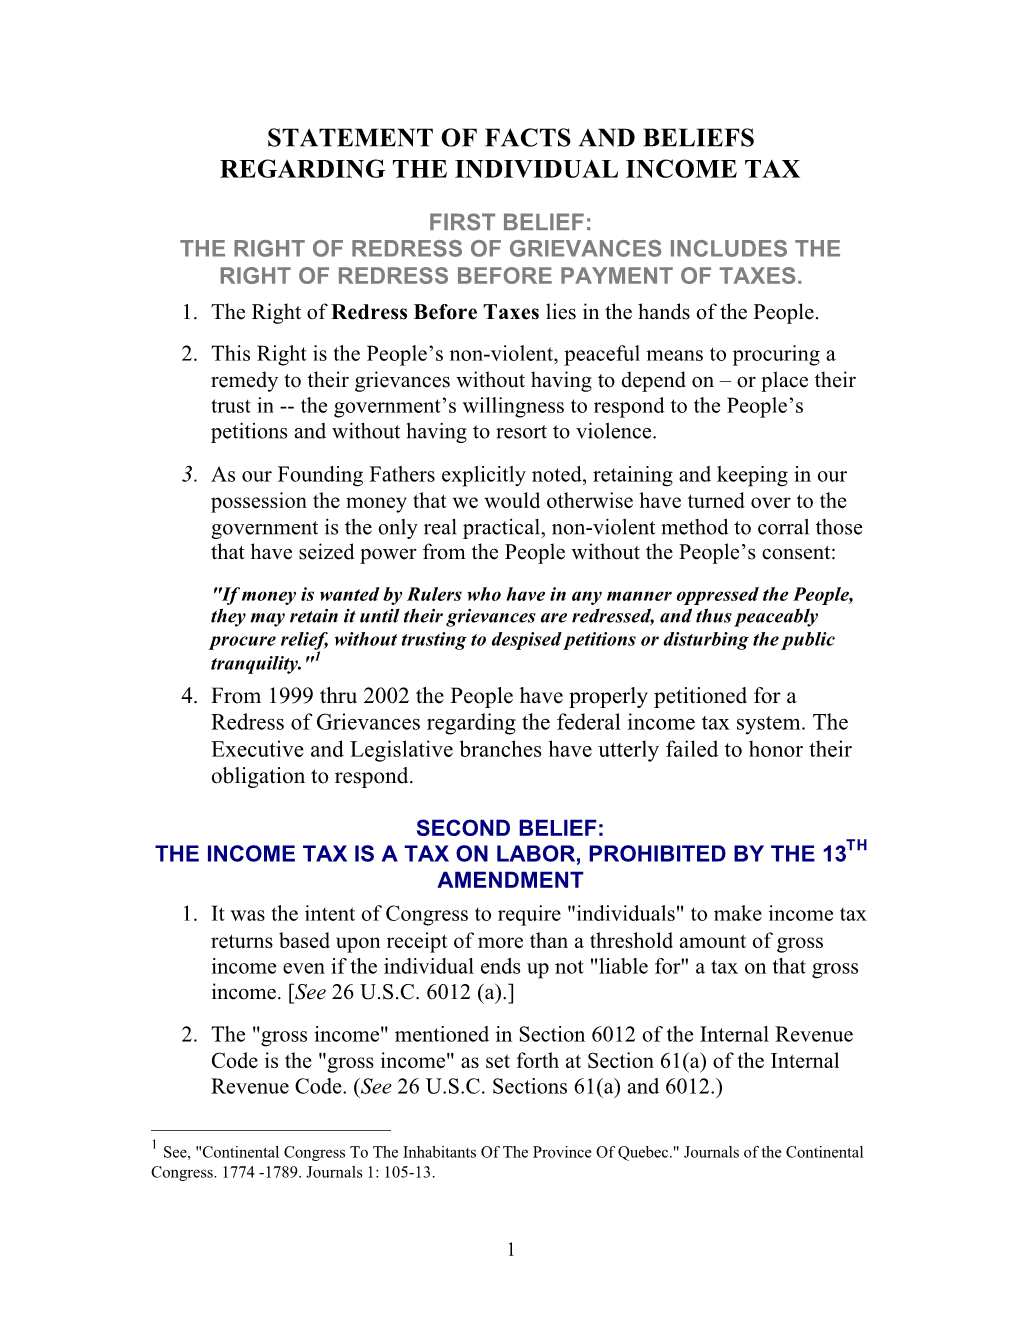 Statement of Facts and Beliefs Regarding the Individual Income Tax